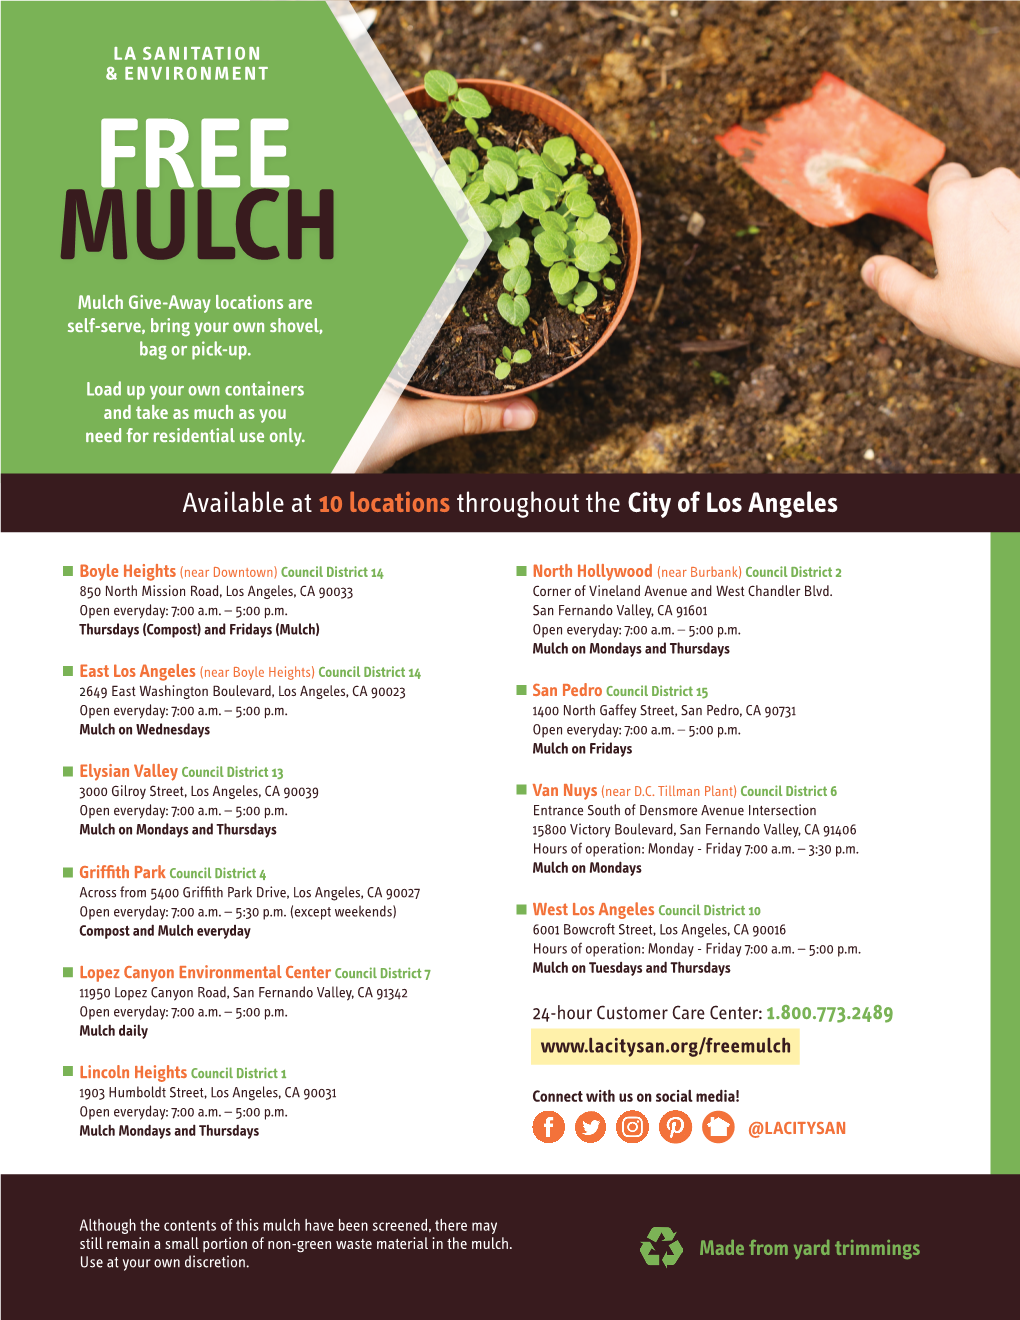 FREE MULCH Mulch Give-Away Locations Are Self-Serve, Bring Your Own Shovel, Bag Or Pick-Up